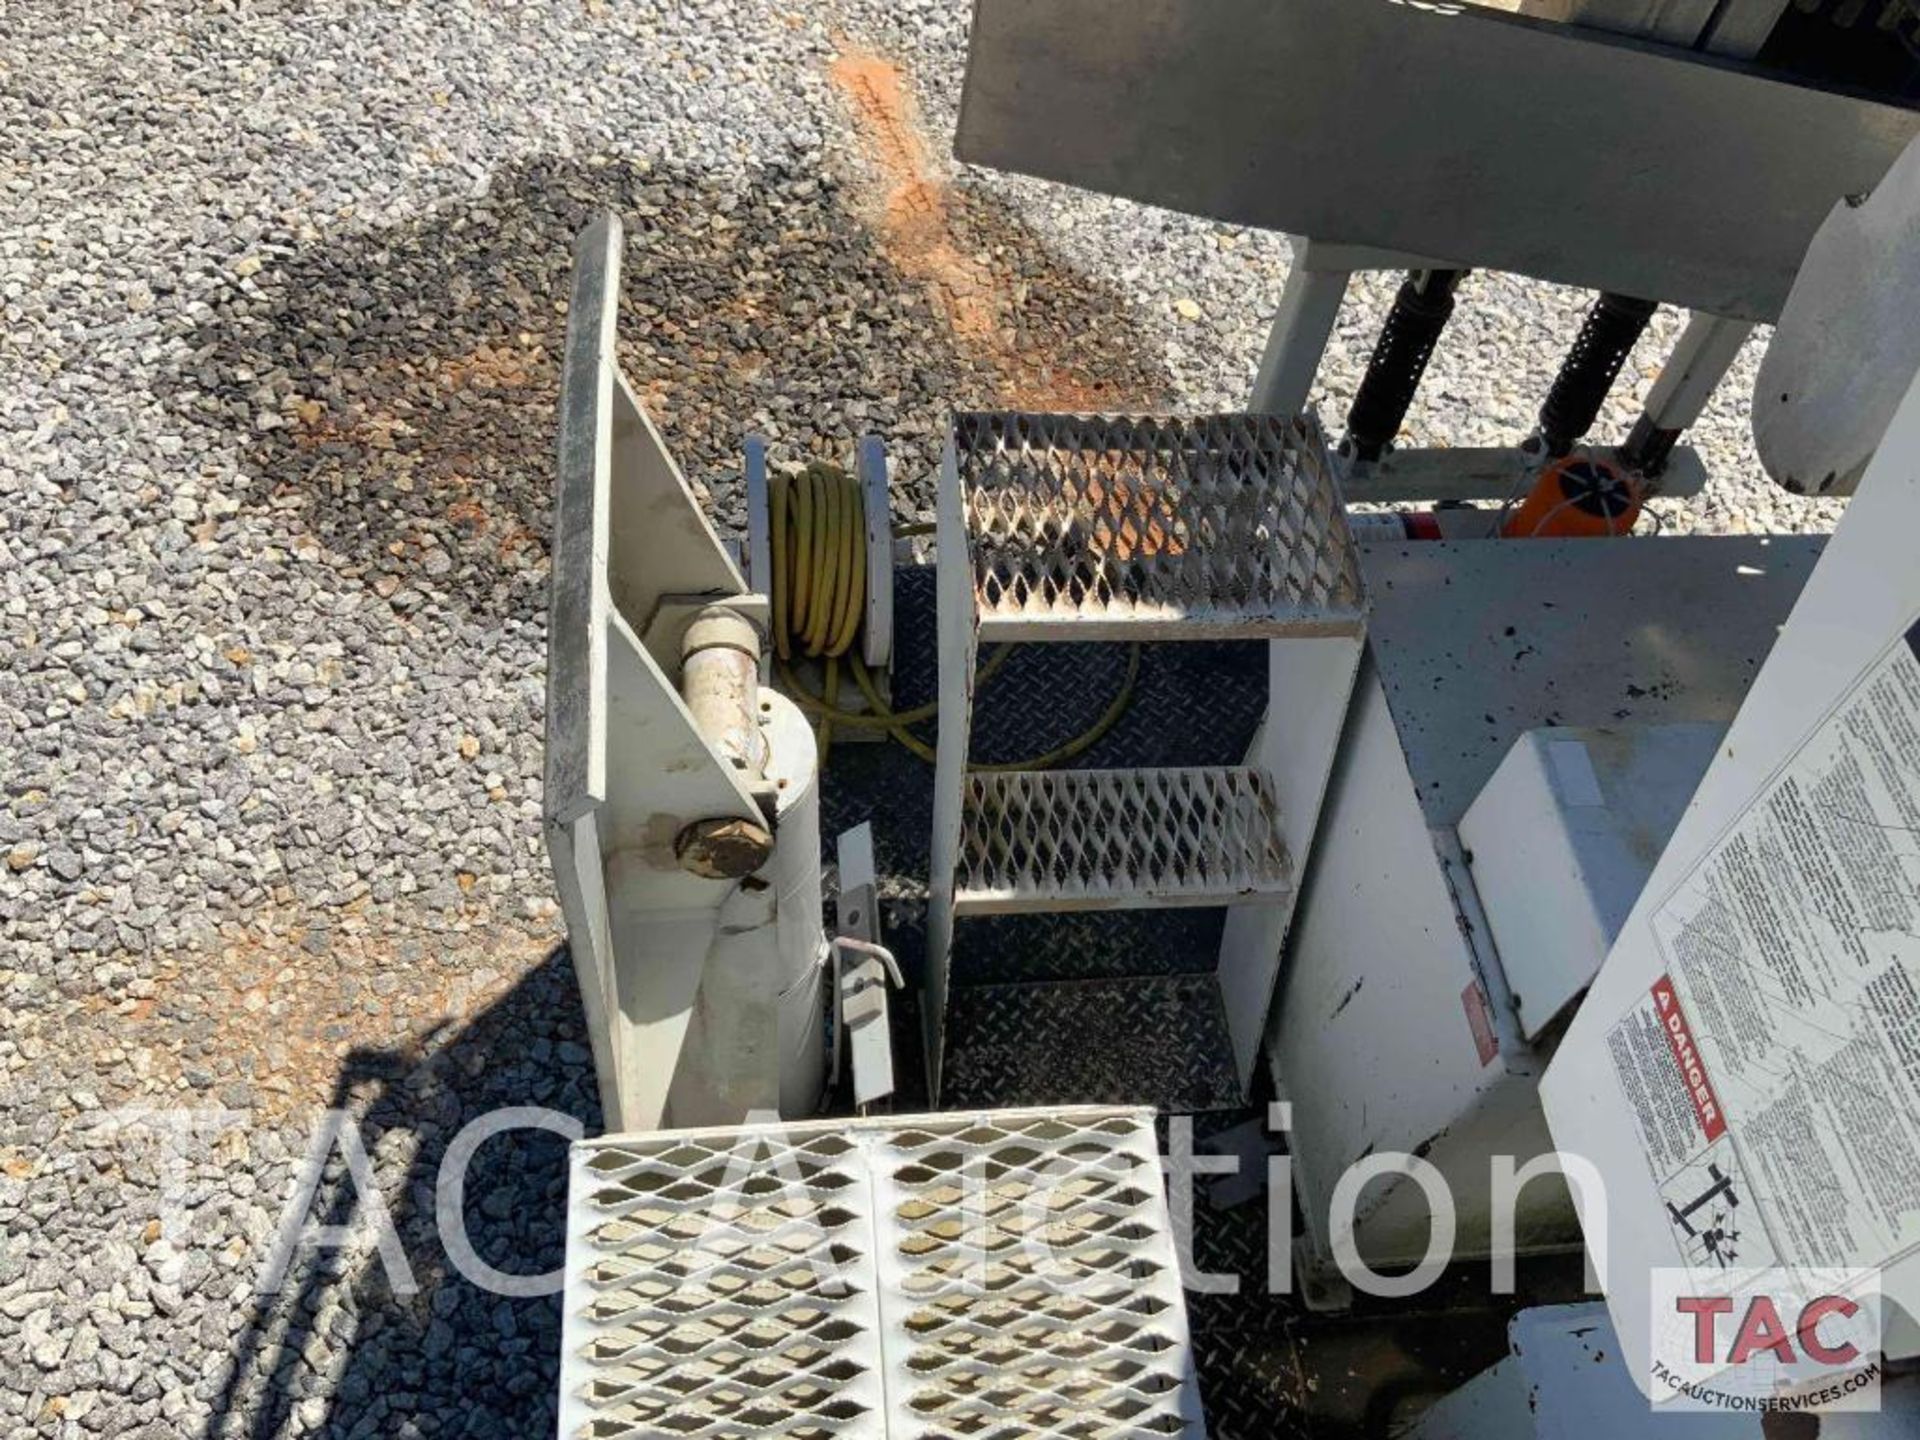 2005 ALTEC AH100 Articulating Non-Overcenter Aerial Bucket Truck Body Only - Image 41 of 69